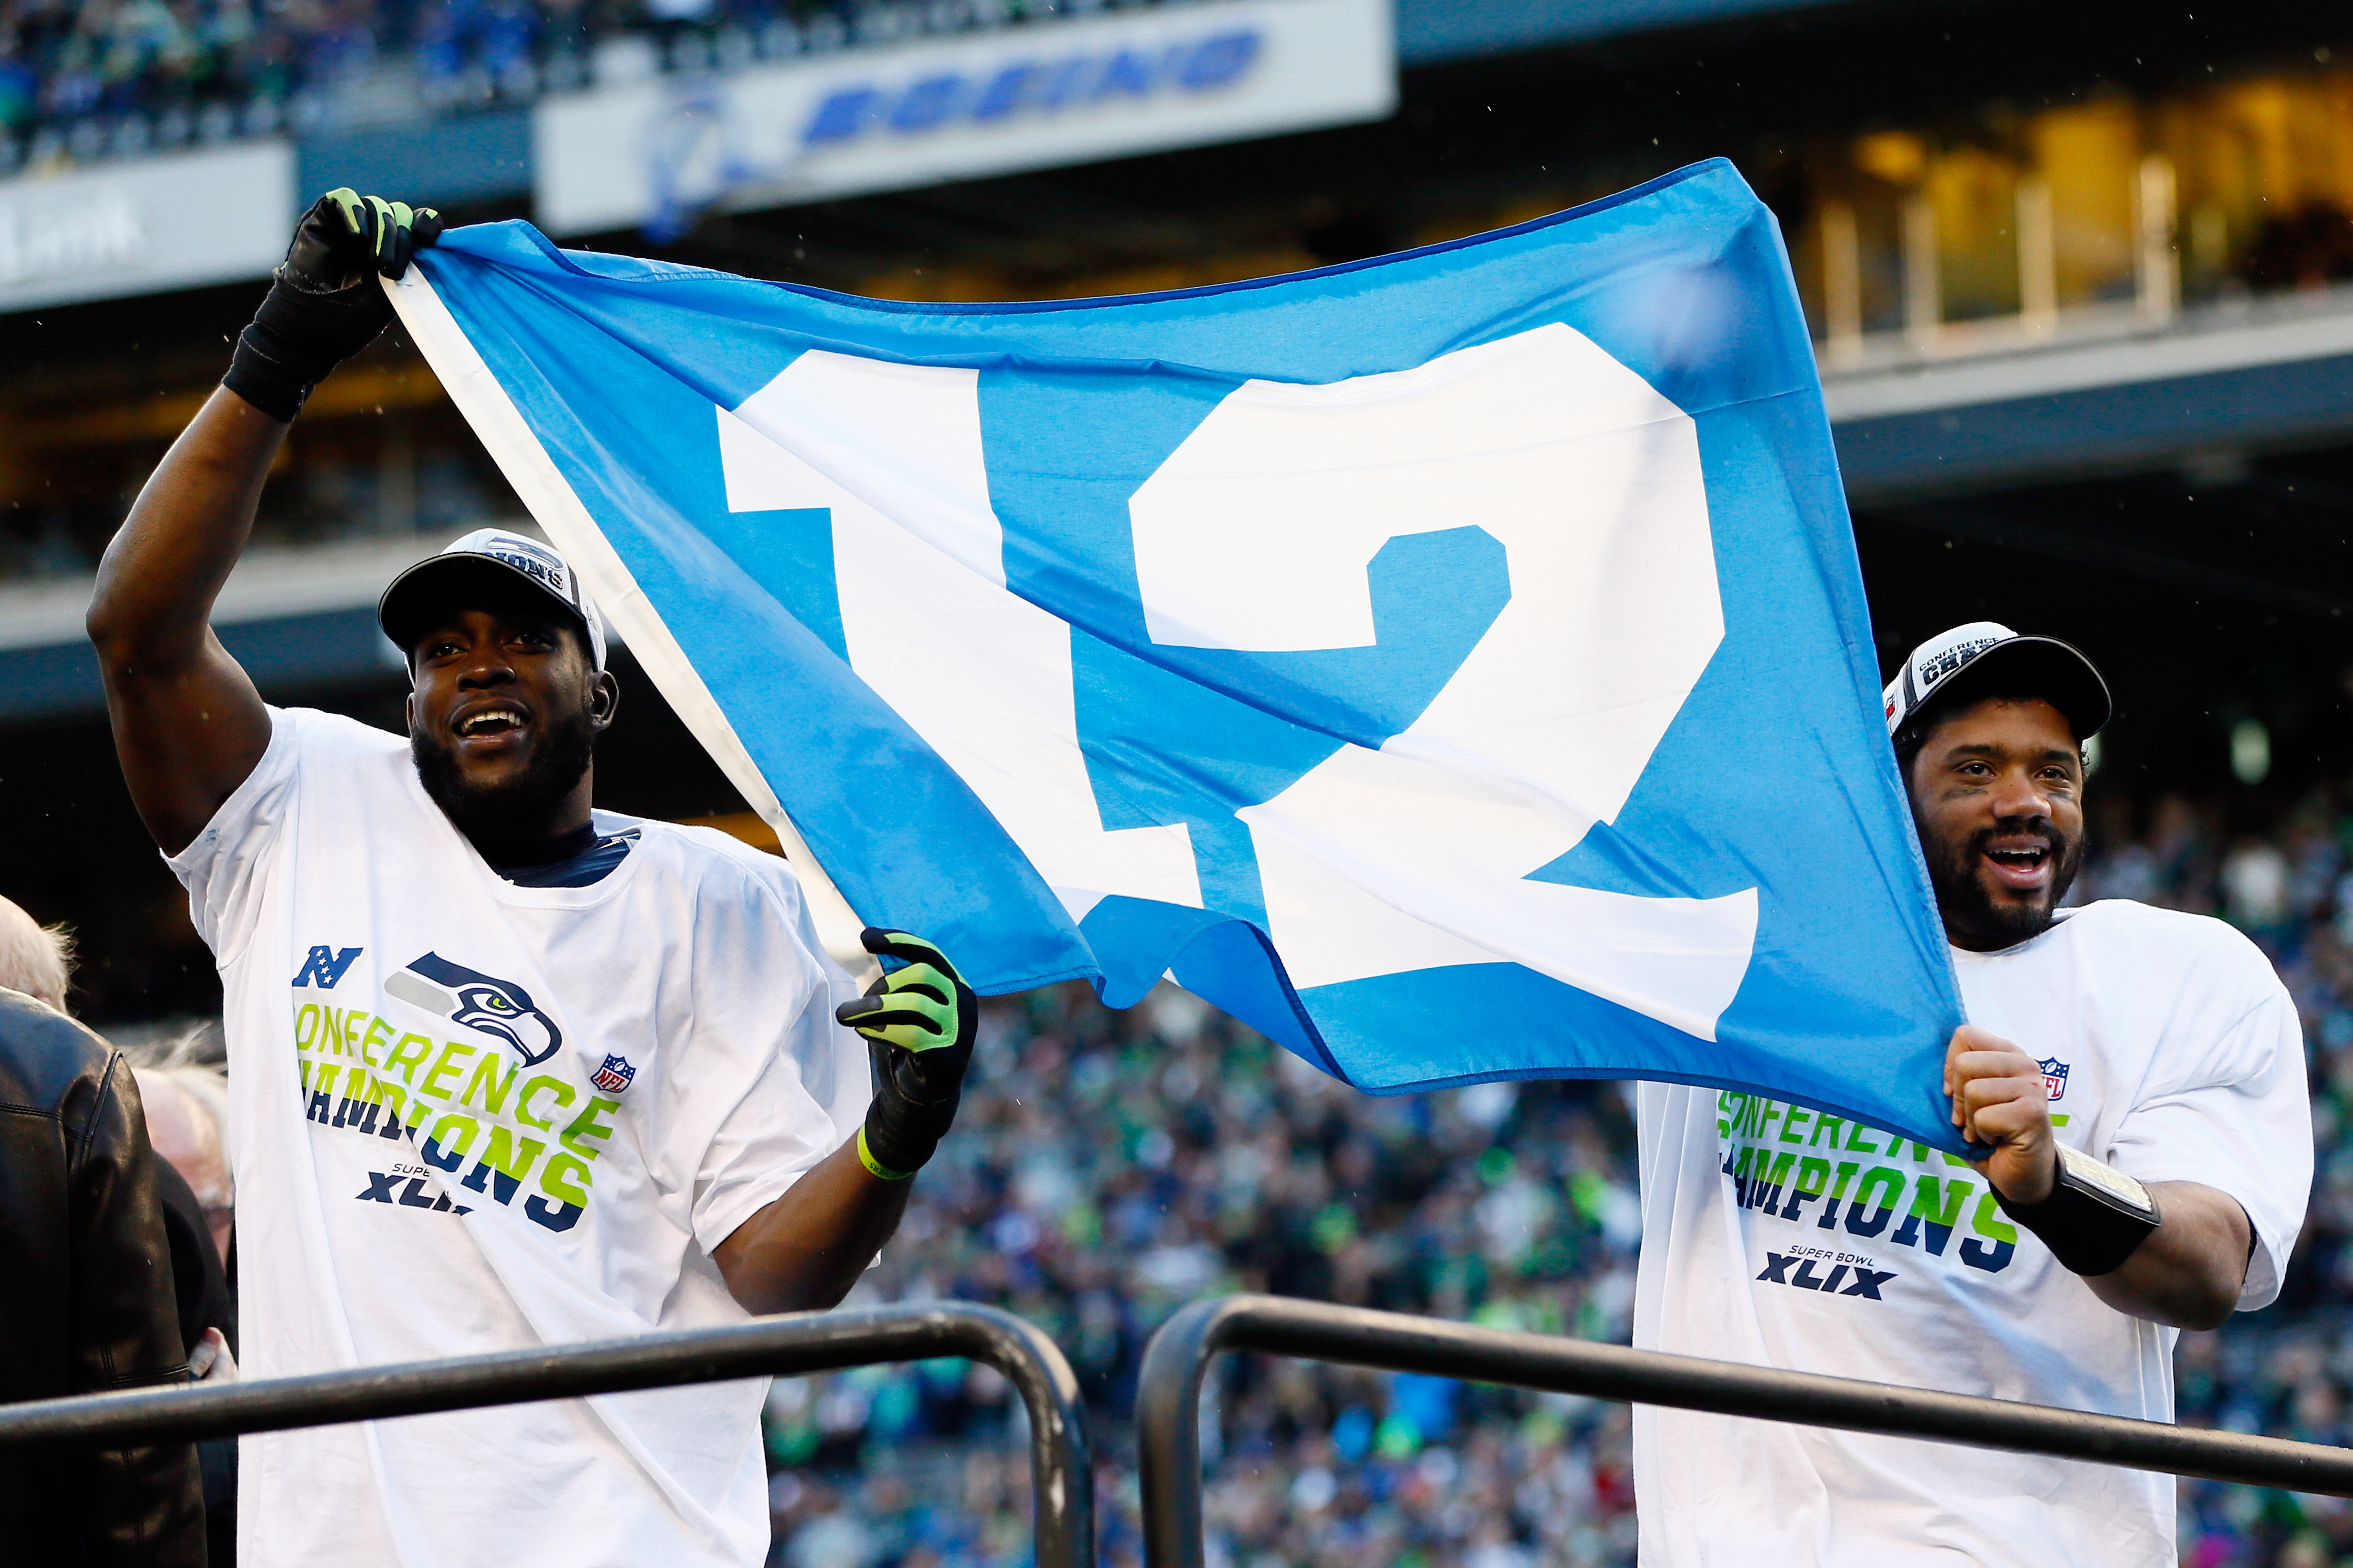 Kam Chancellor (L) and Russell Wilson #3 of the Seattle Seahawks celebrate with a 12th Man flag after defeating the Green Bay Packers in the 2015 NFC Championship game at CenturyLink Field on Jan. 18, 2015 in Seattle, Wash. (Kevin C. Cox—Getty Images)